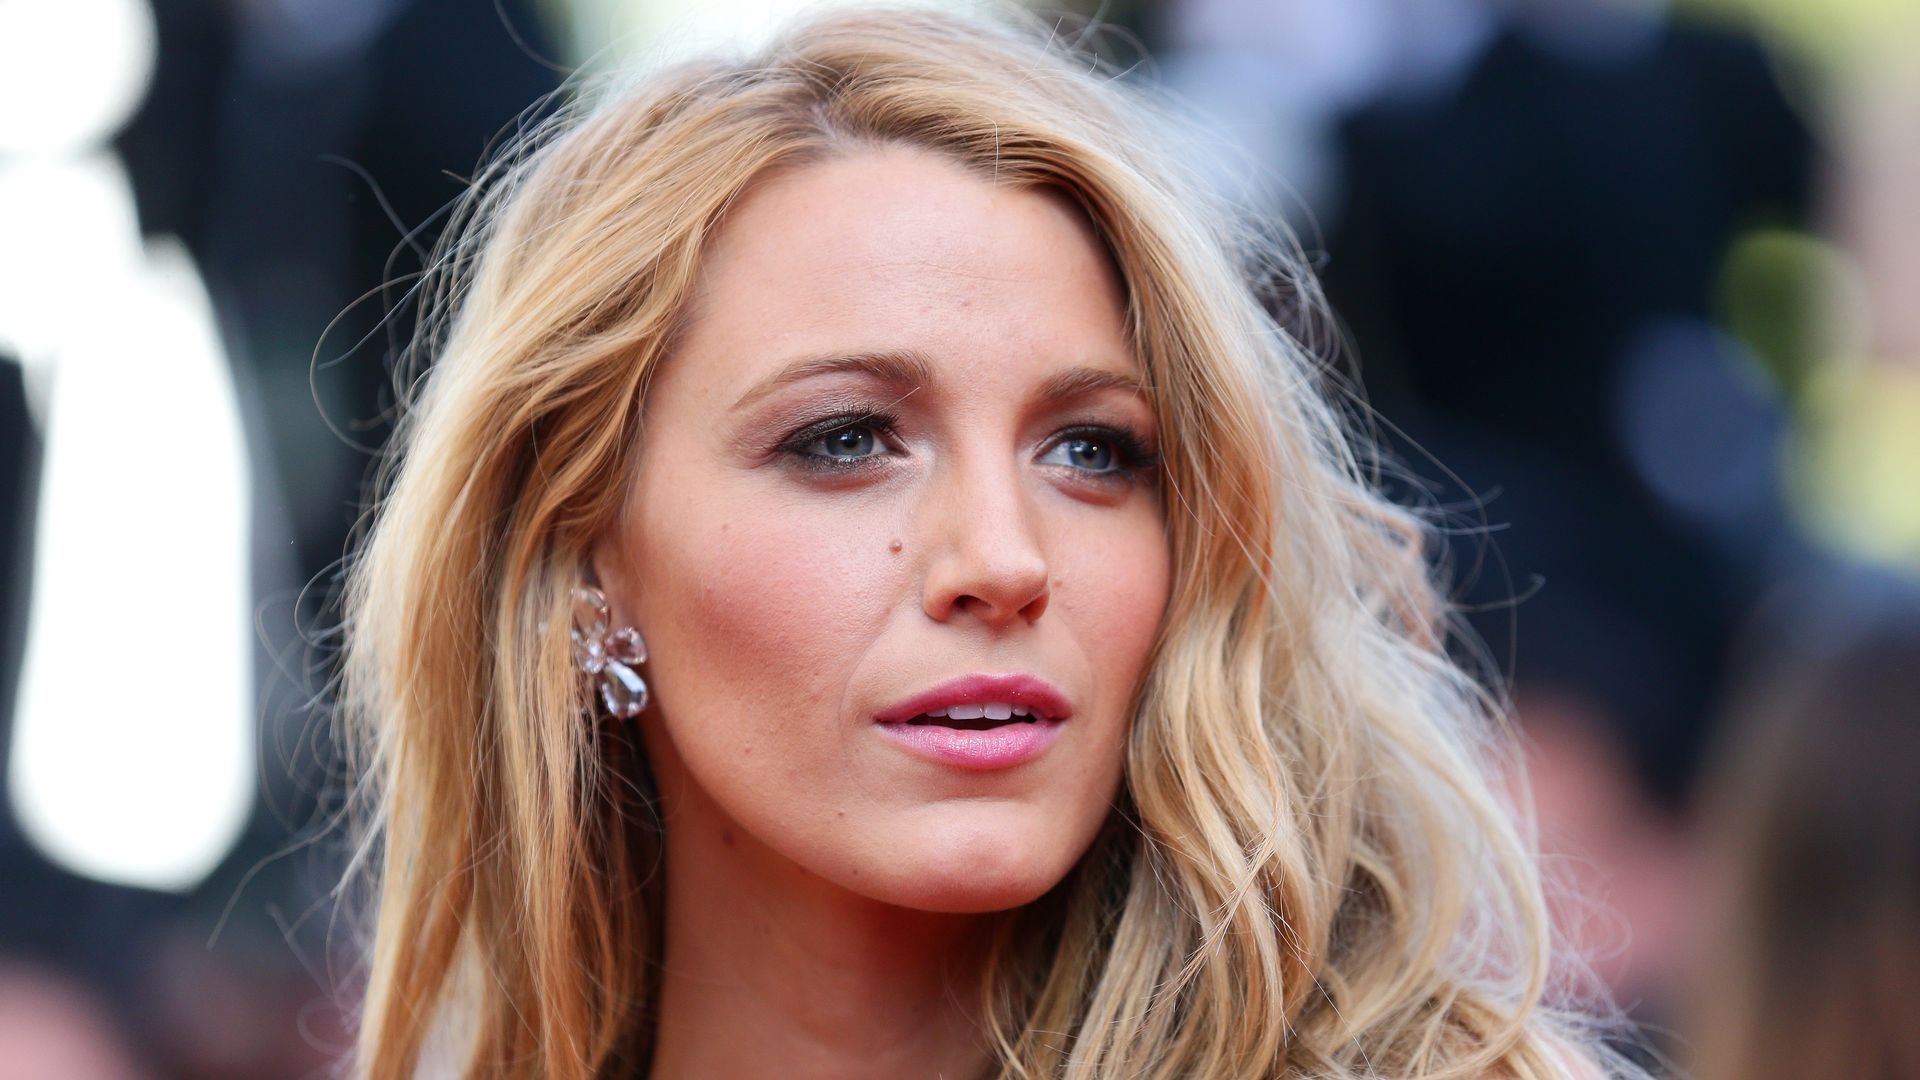 Blake Lively attends Mr Turner premiere during the 67th Annual Cannes Film Festival 